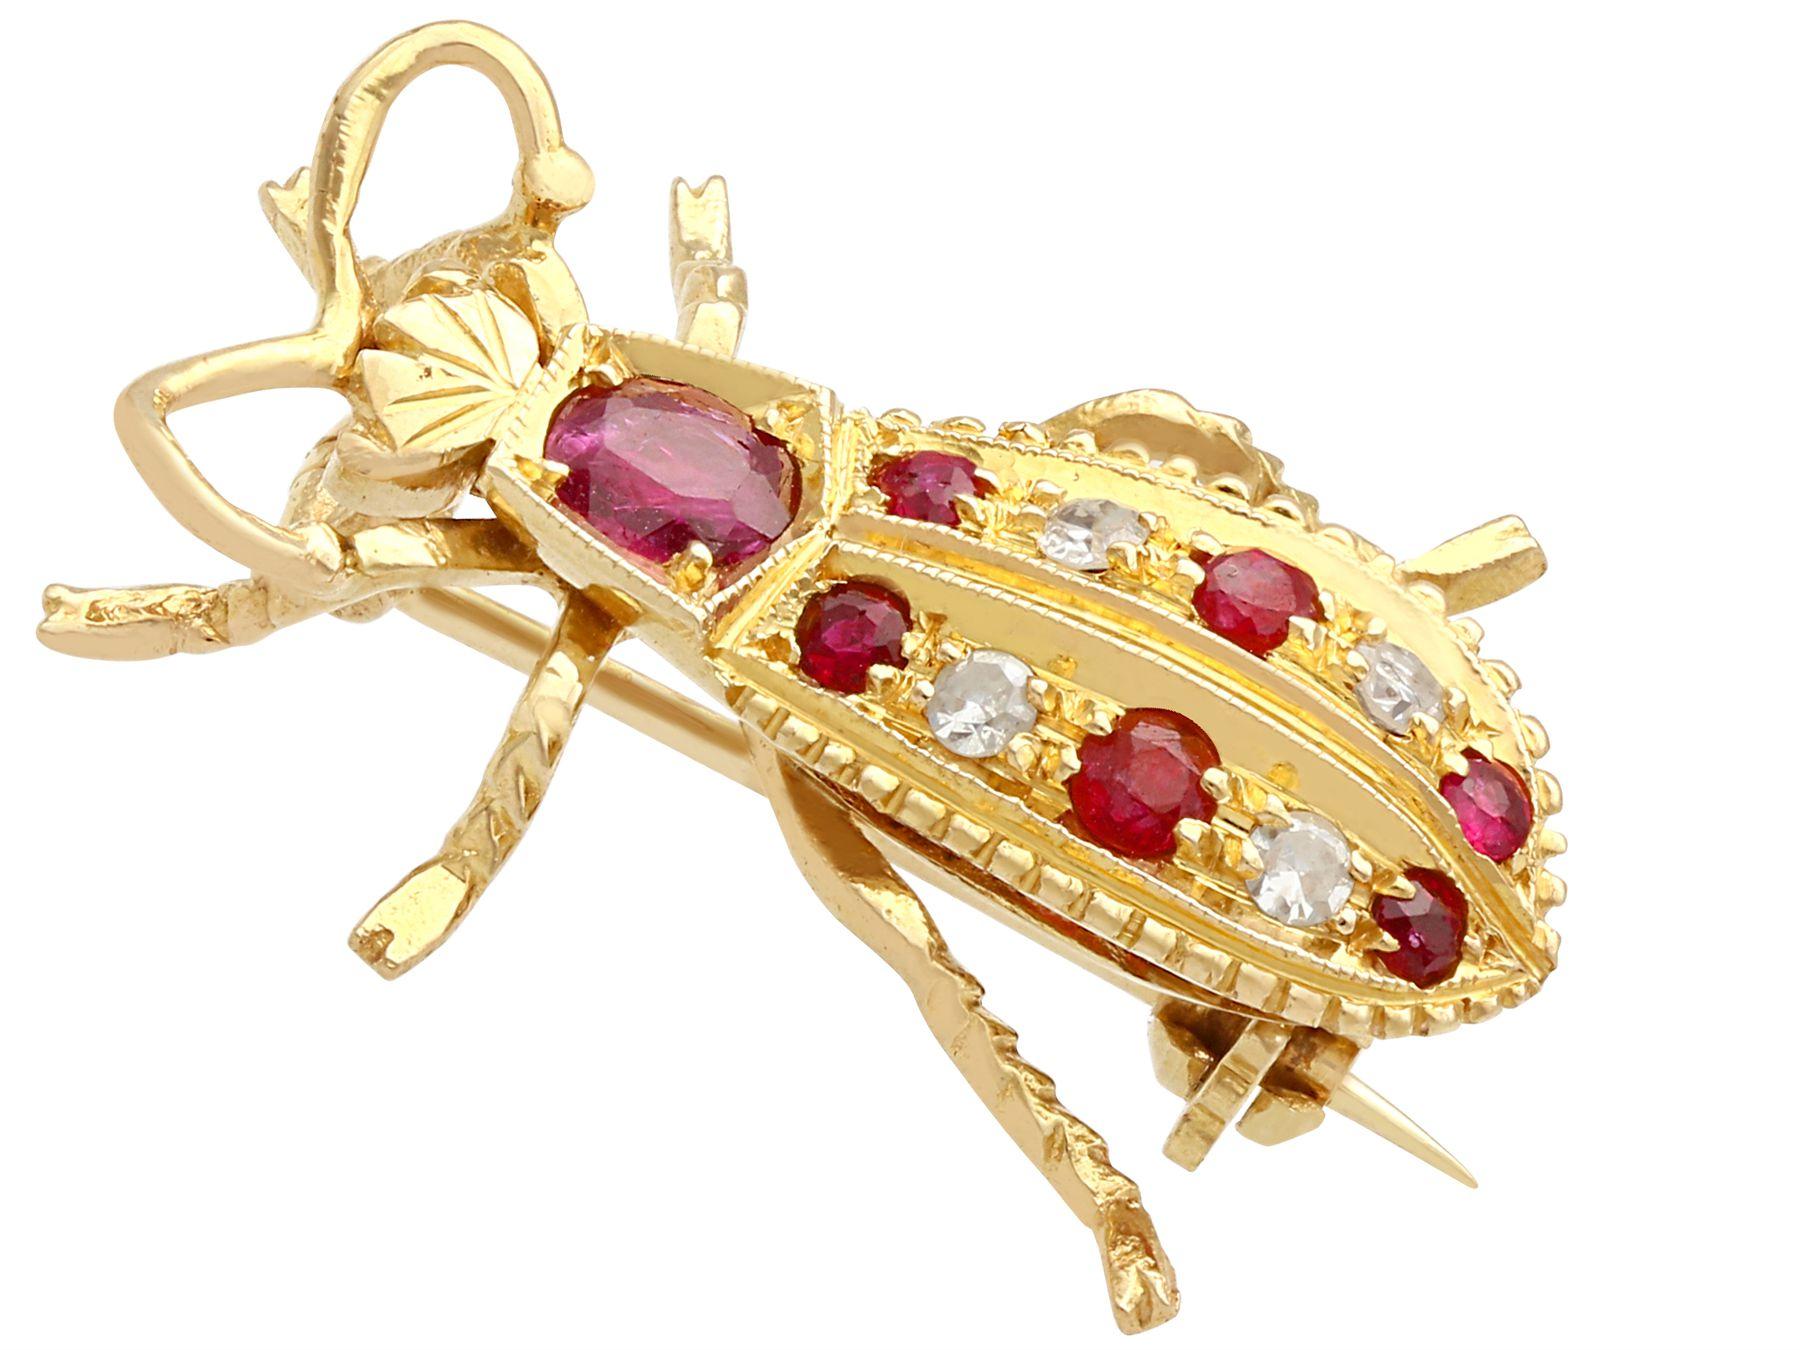 A fine and impressive 0.43 carat ruby and 0.04 carat diamond, 18 karat yellow gold 'insect' brooch; part of our diverse vintage jewelry and estate jewelry collections.

This fine and impressive vintage insect brooch has been crafted in 18k yellow